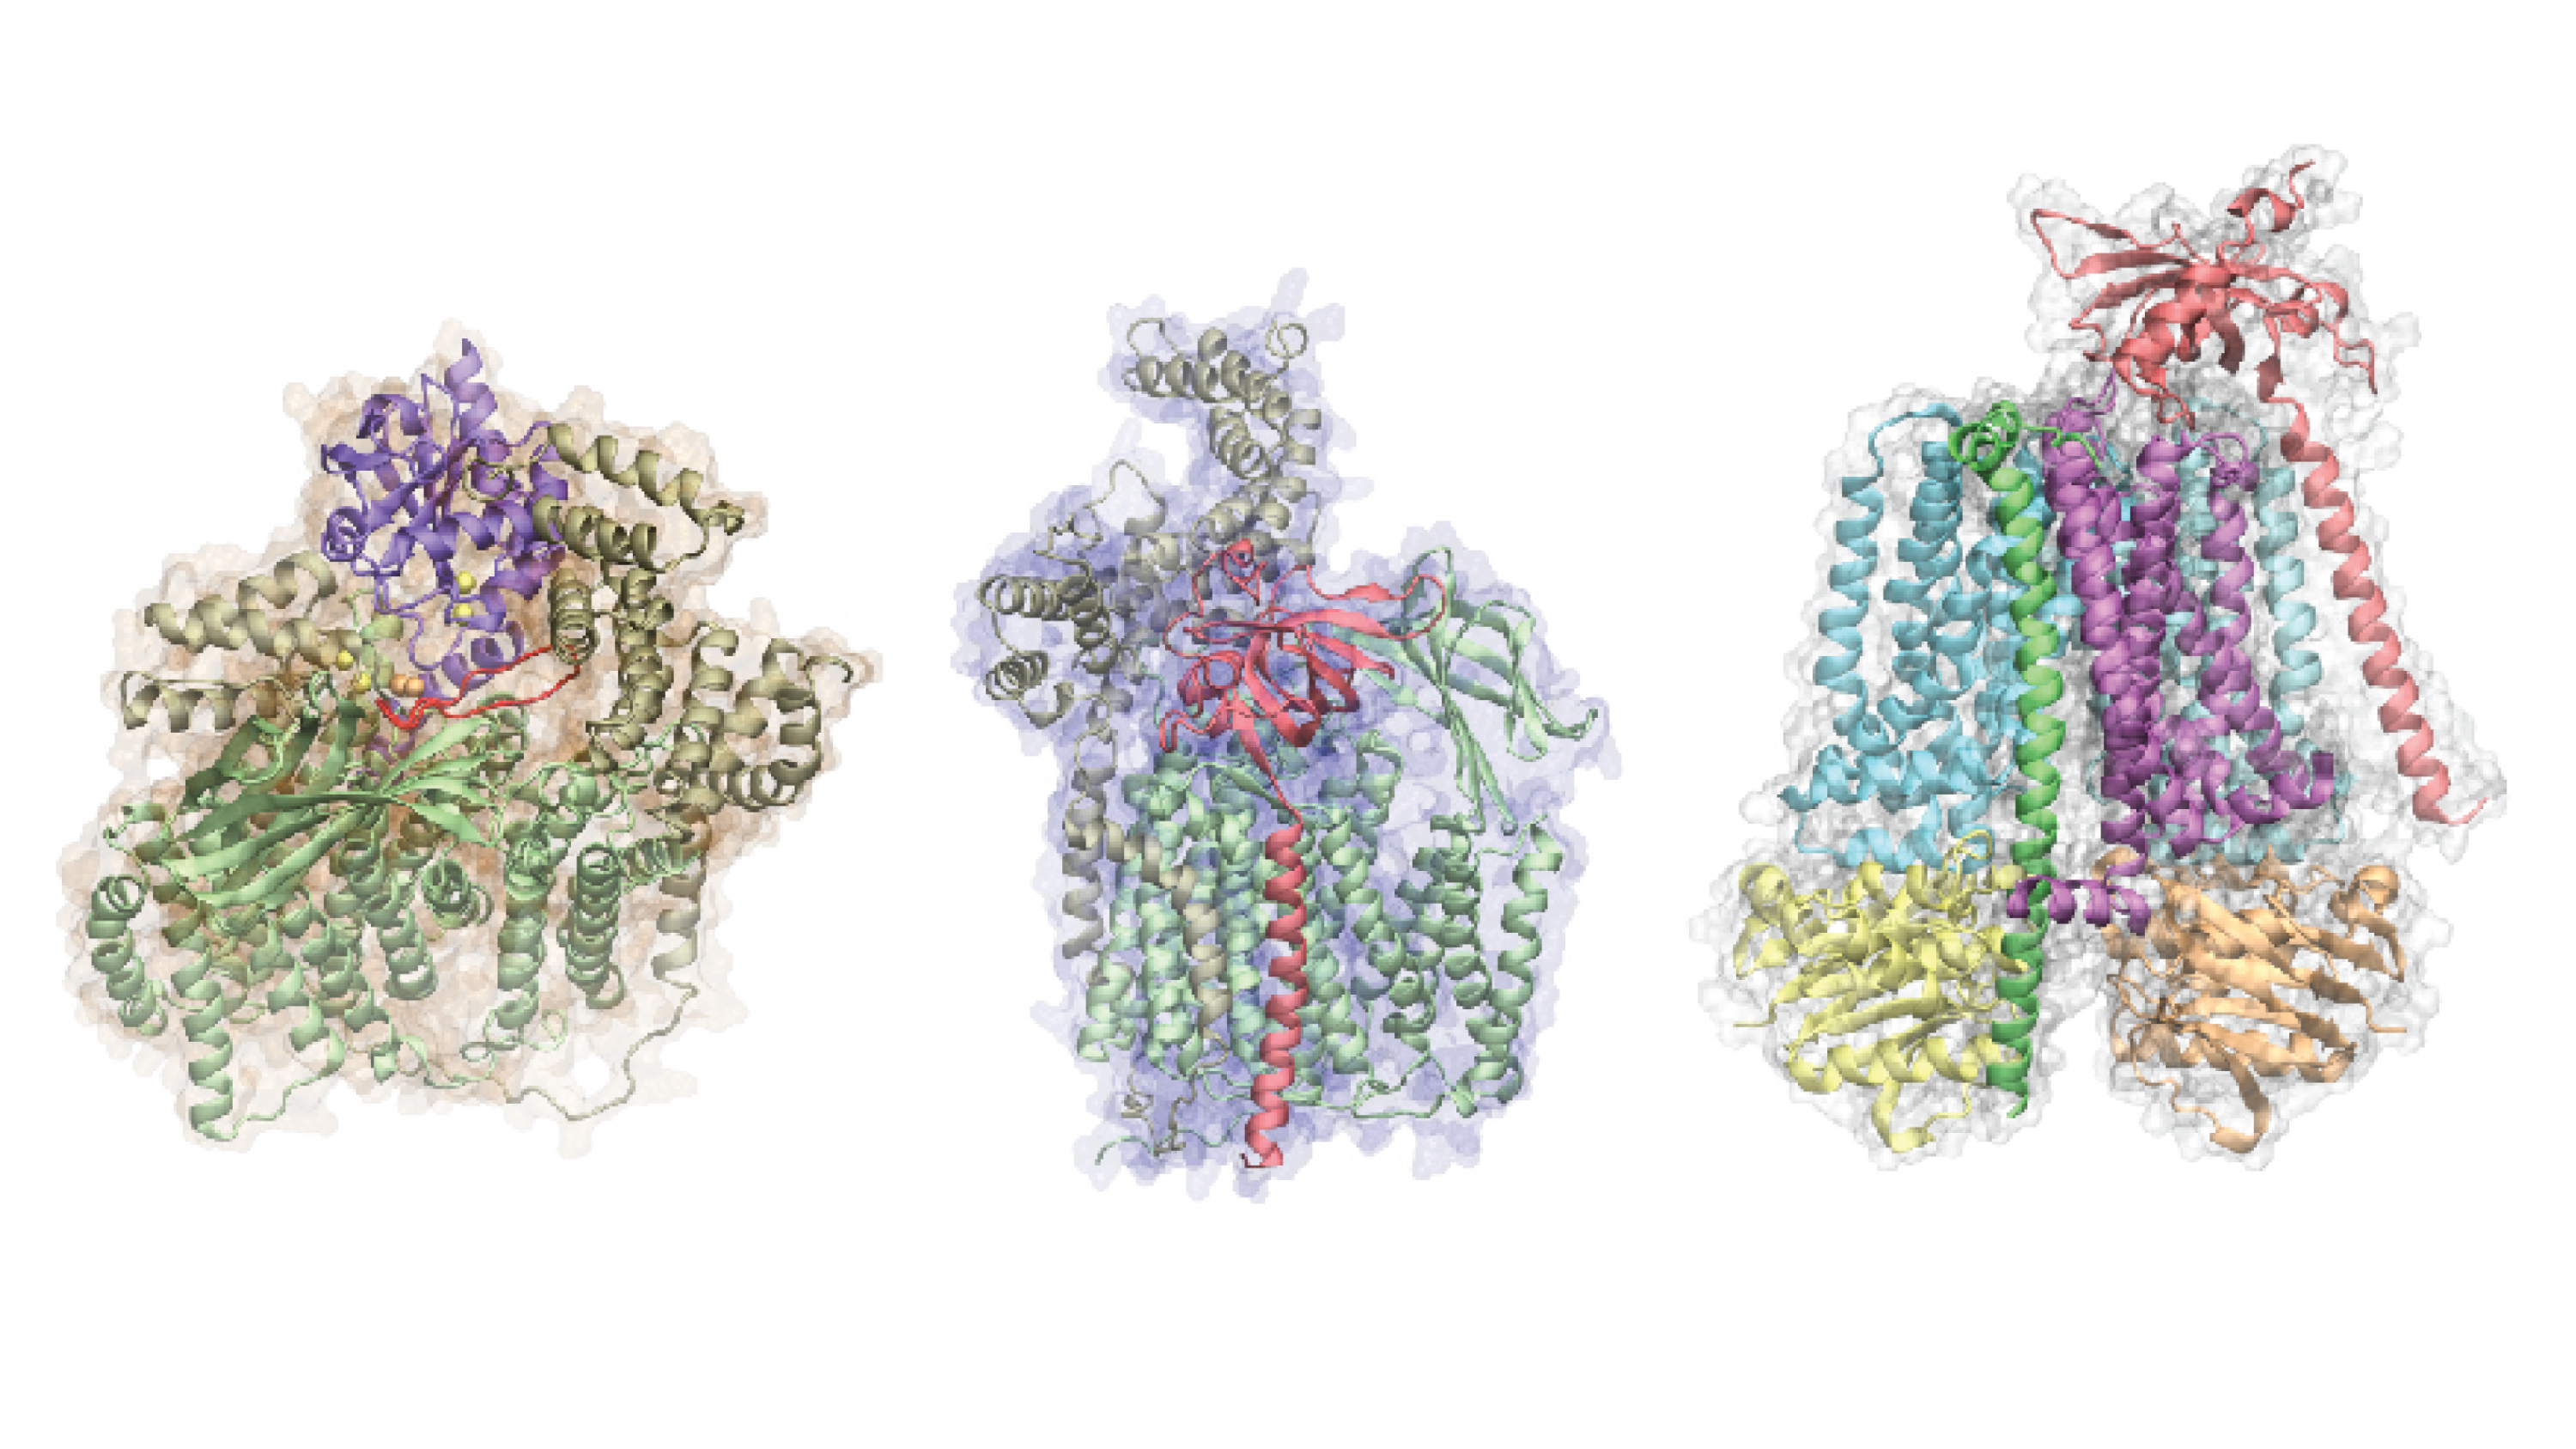 A 3D rendering of a protein complex structures predicted from protein sequences by AF2Complex. Credit: Mu Gao.